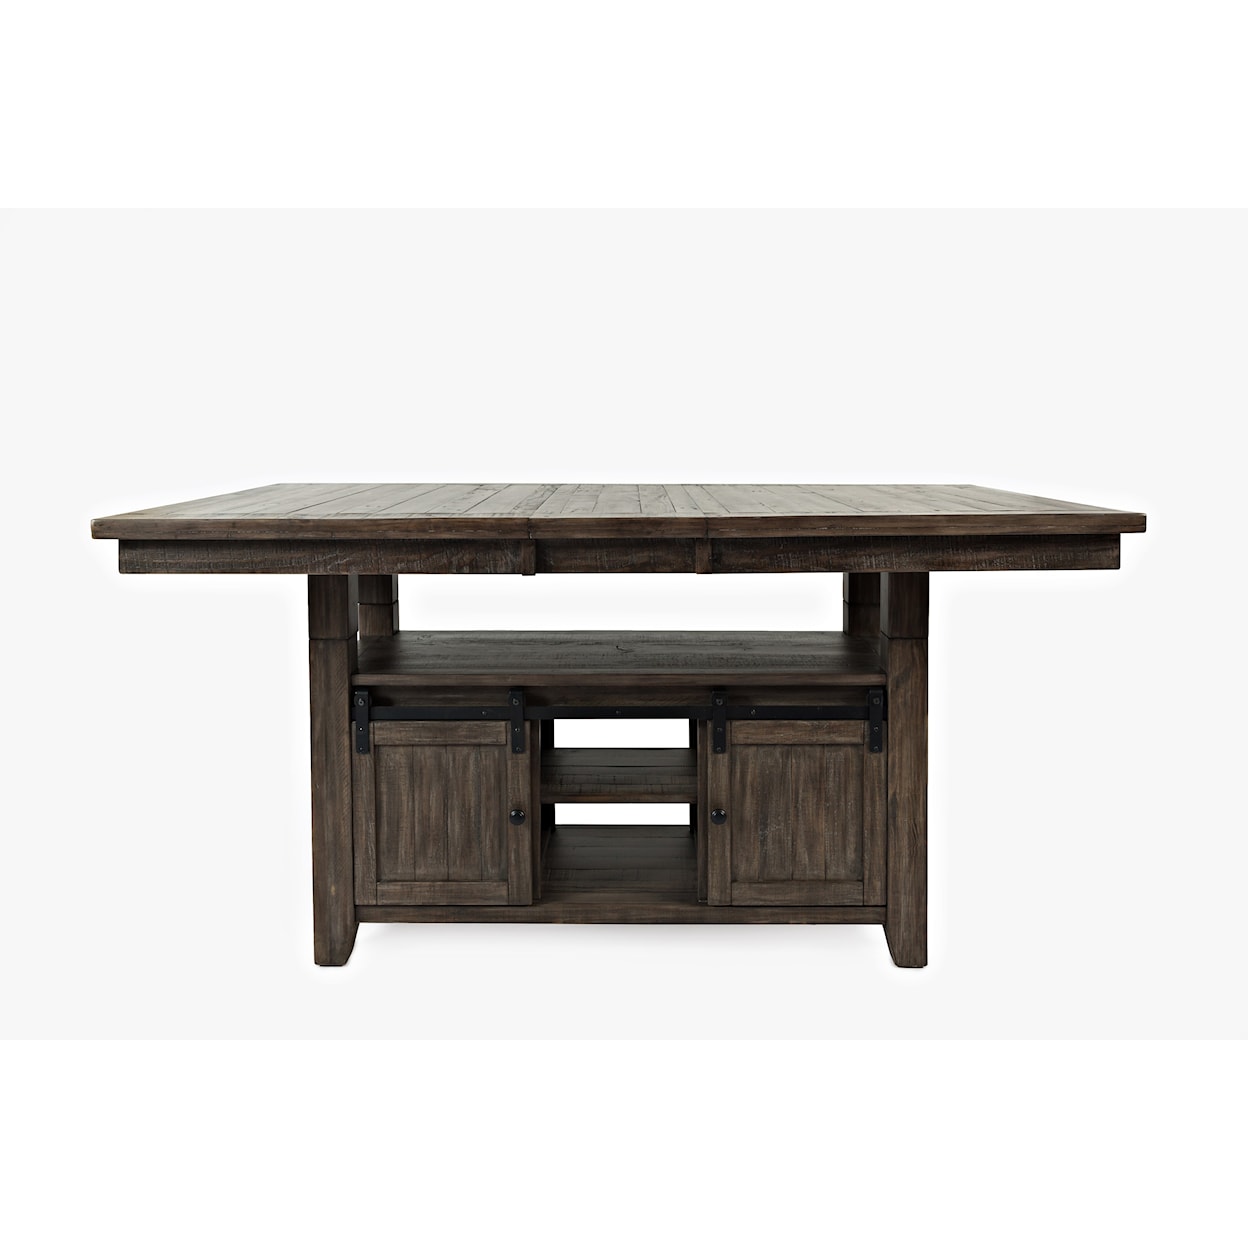 Jofran Stables Adjustable Height Dining Table